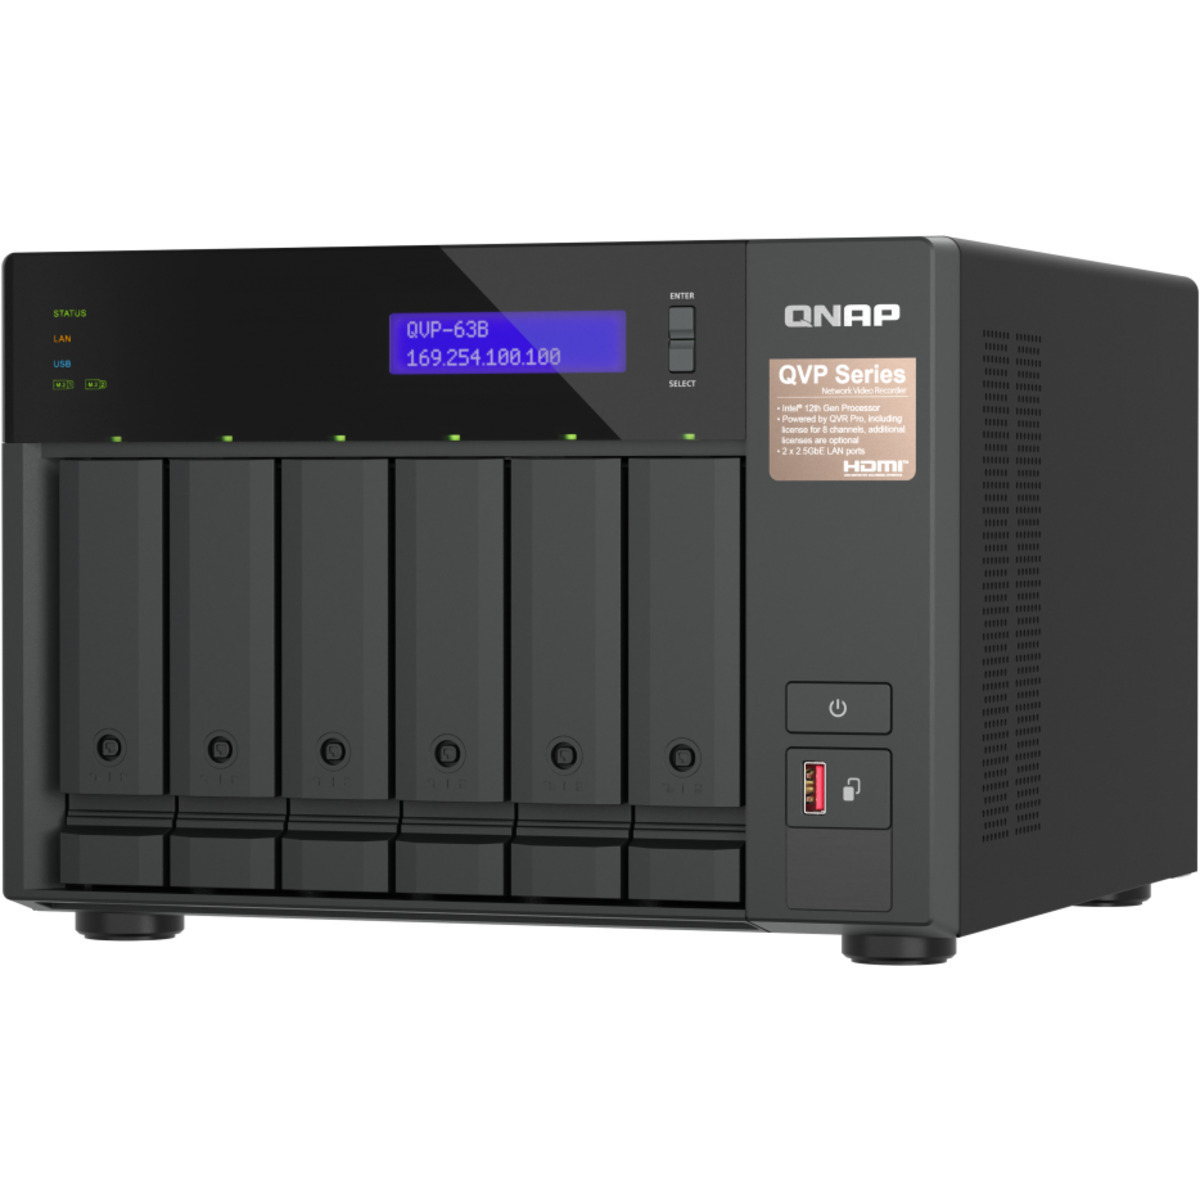 buy $3791 QNAP QVP-63B 36tb Desktop NVR - Network Video Recorder 6x6000gb Seagate IronWolf Pro ST6000NT001 3.5 7200rpm SATA 6Gb/s HDD NAS Class Drives Installed - Burn-In Tested - nas headquarters buy network attached storage server device das new raid-5 free shipping simply usa QVP-63B